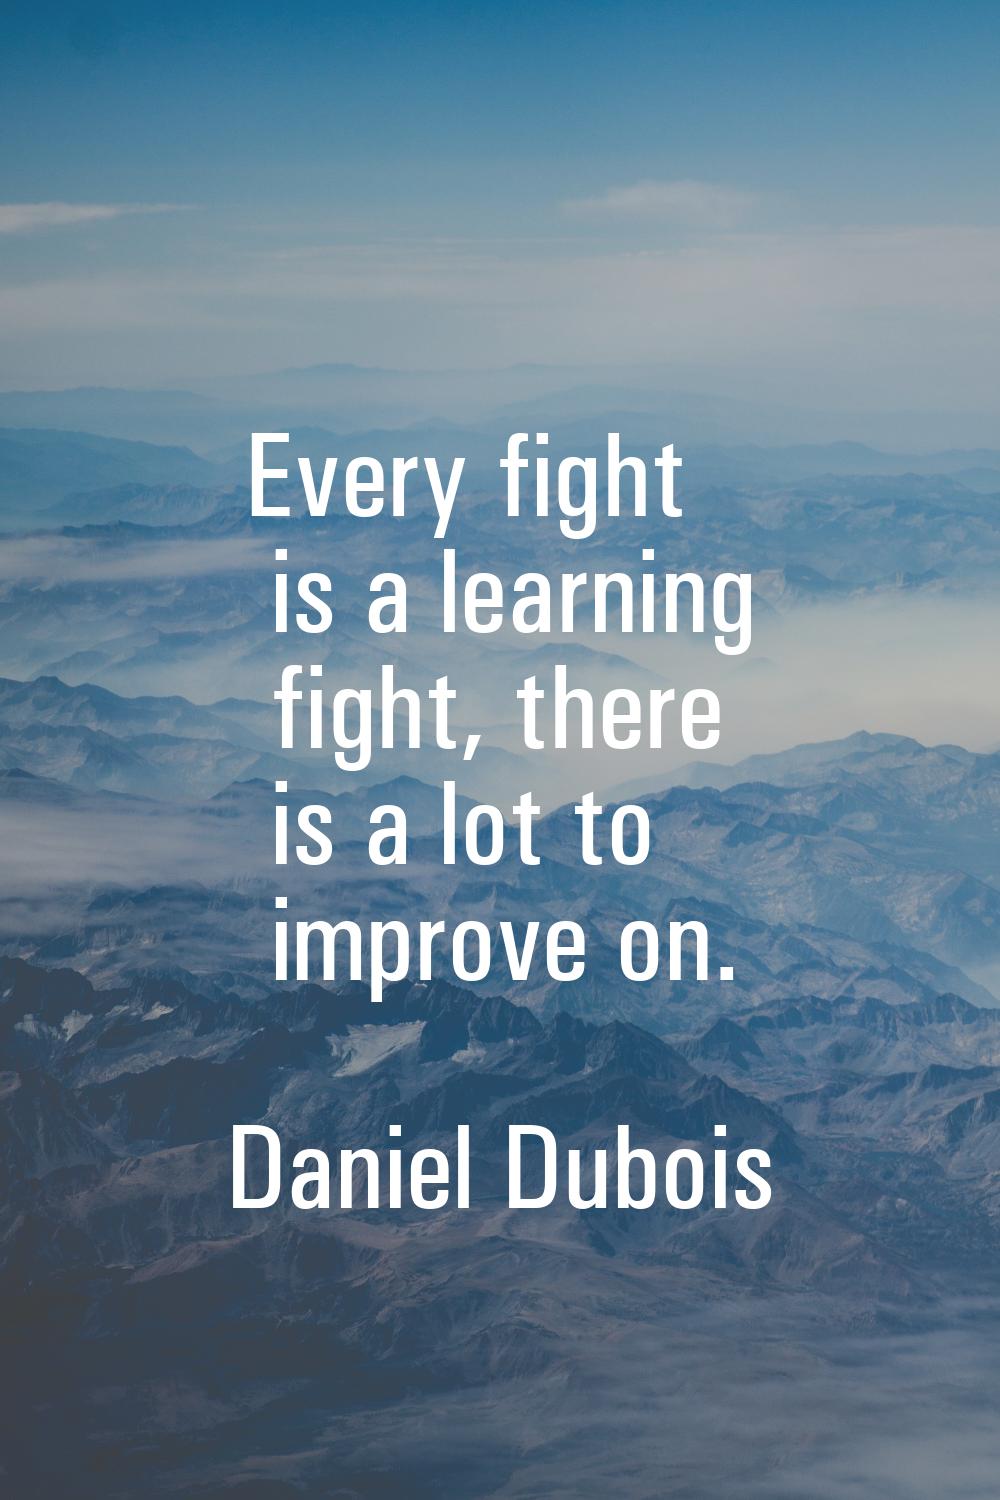 Every fight is a learning fight, there is a lot to improve on.